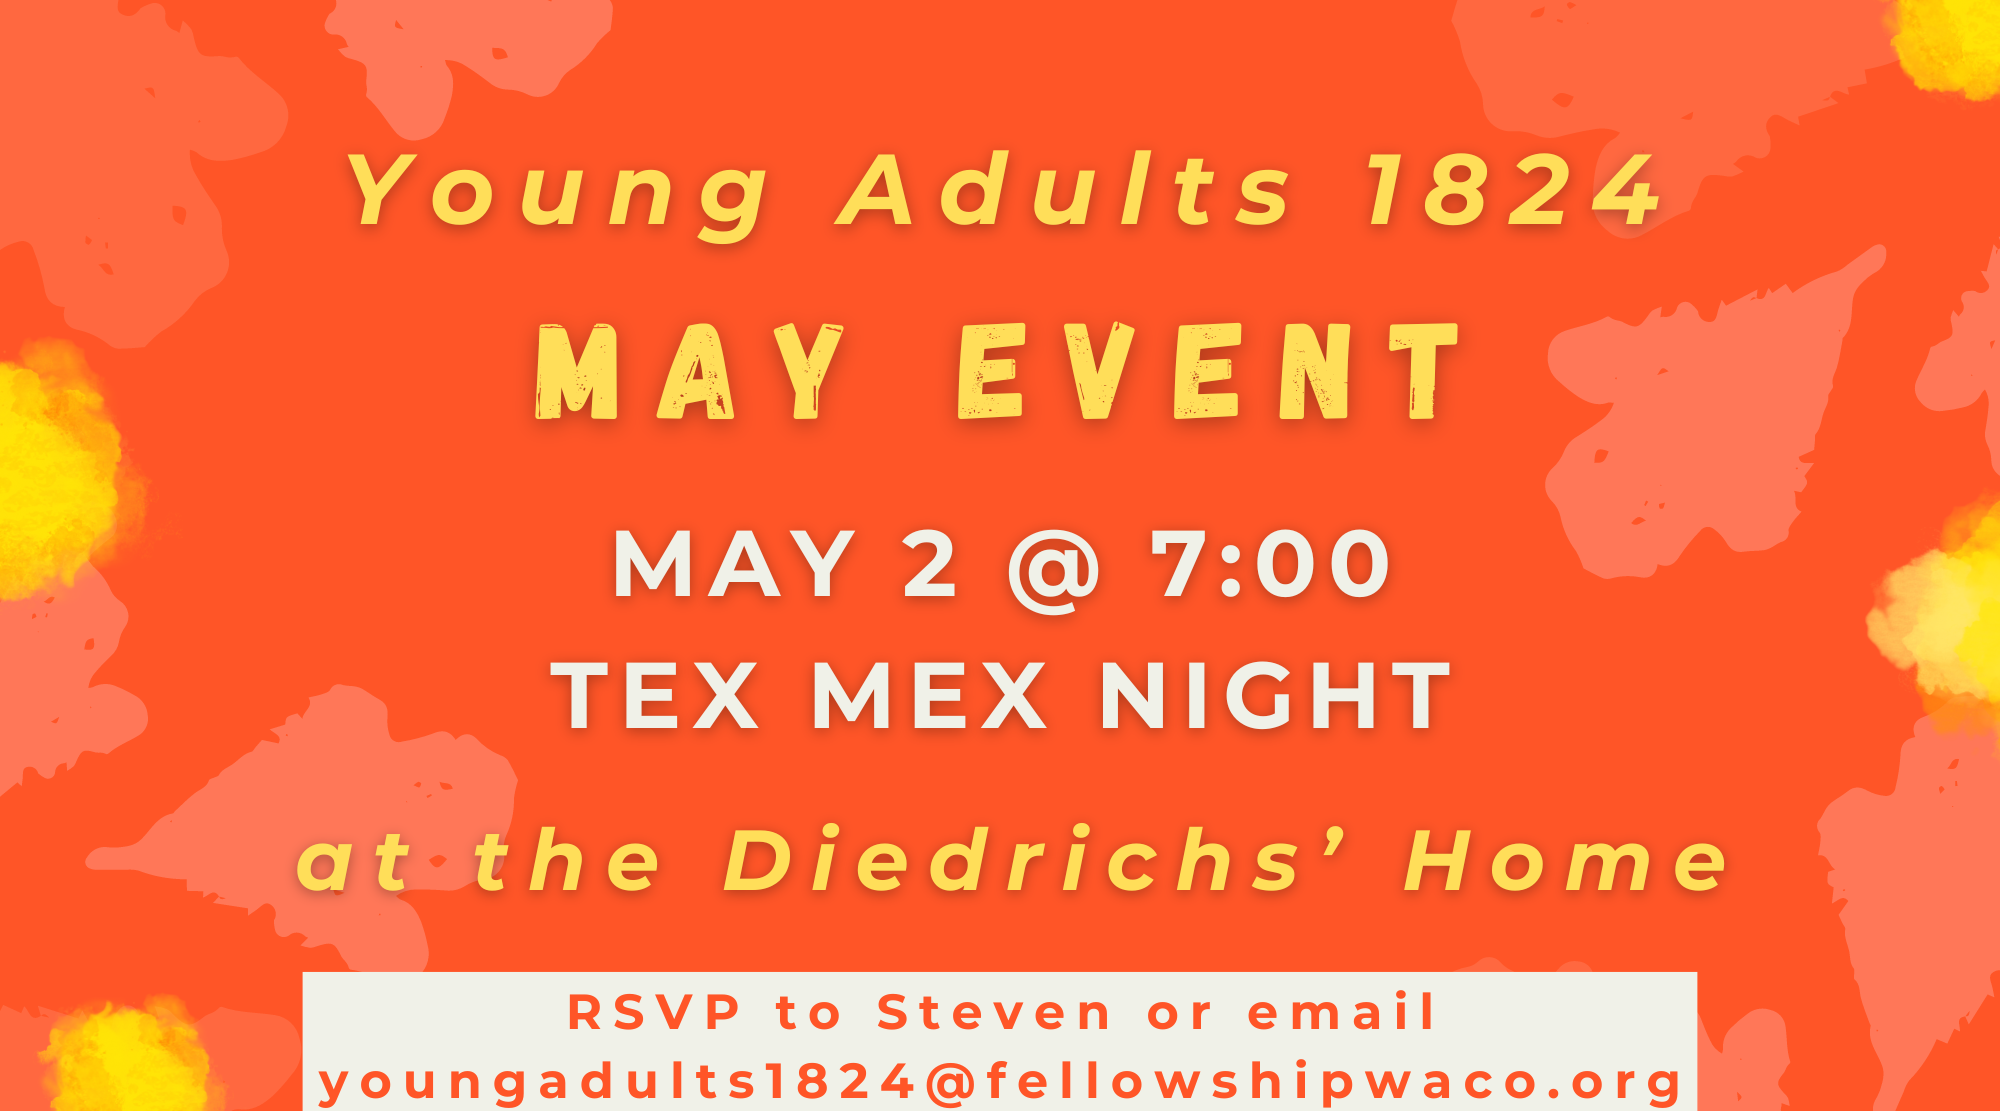 Young Adults Spring Events (9 x 5 in) (1)